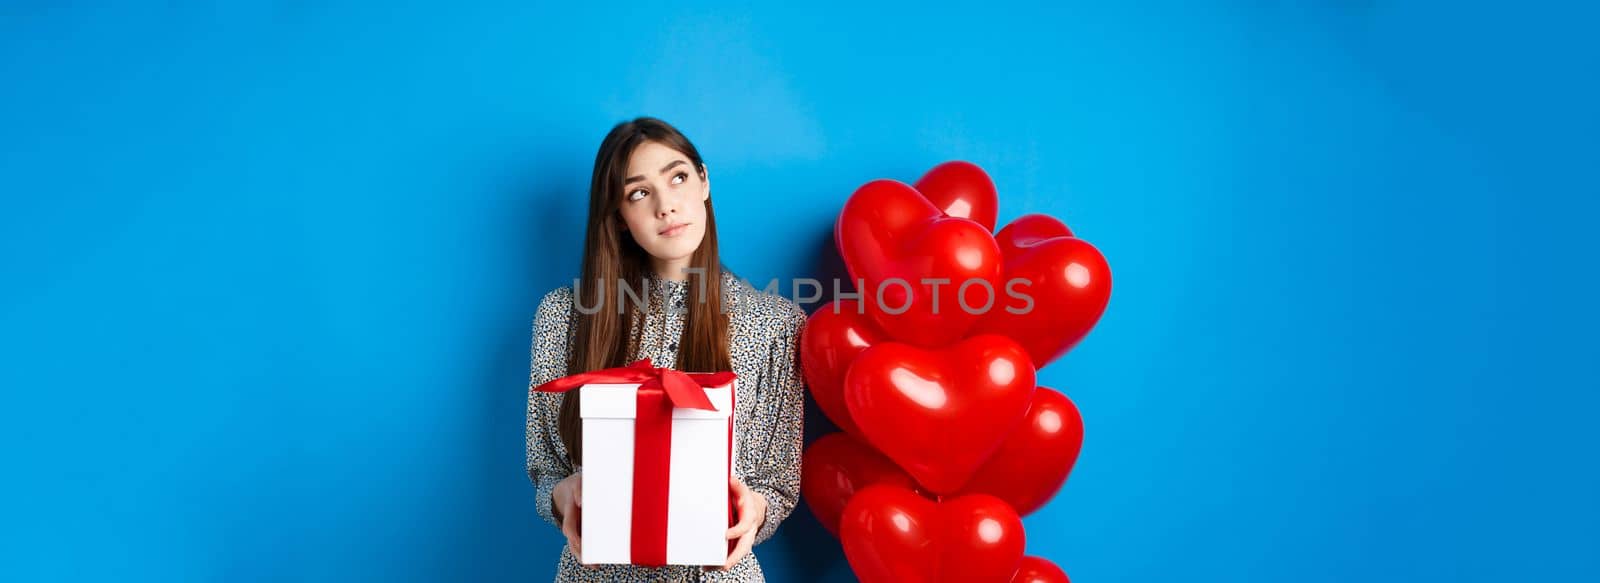 Valentines holiday concept. Pensive young woman in dress, holding gift and looking at upper left corner, thinking about lovers day, standing near red hearts balloons, blue background.